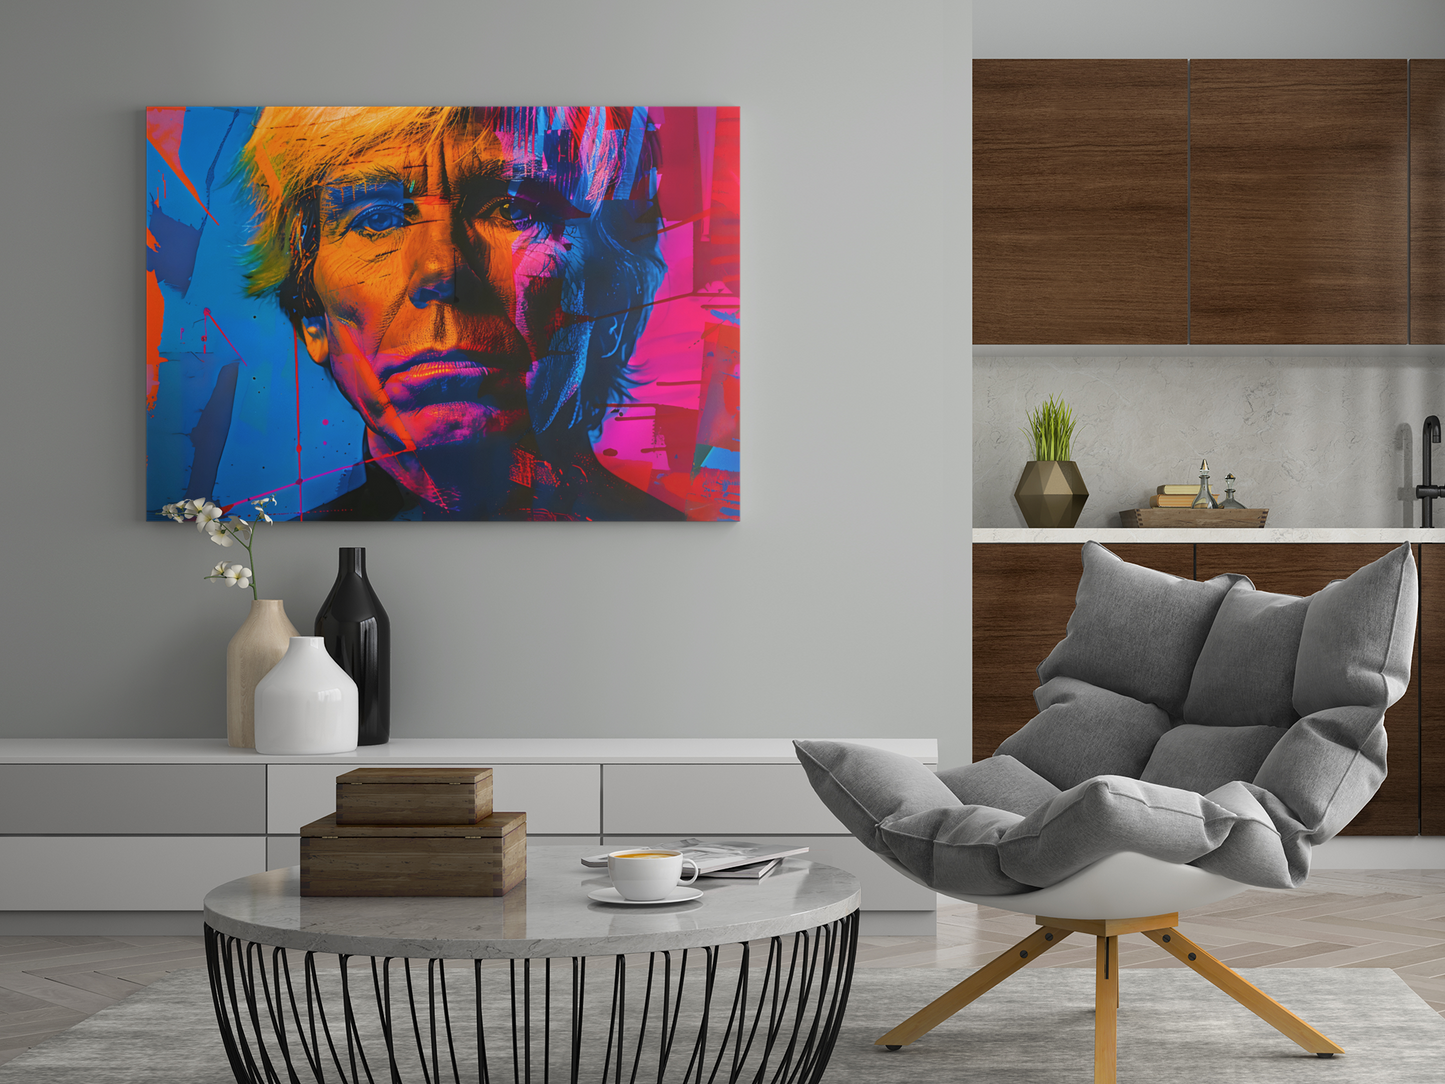 The Living Mosaic - Inspired by Andy Warhol 